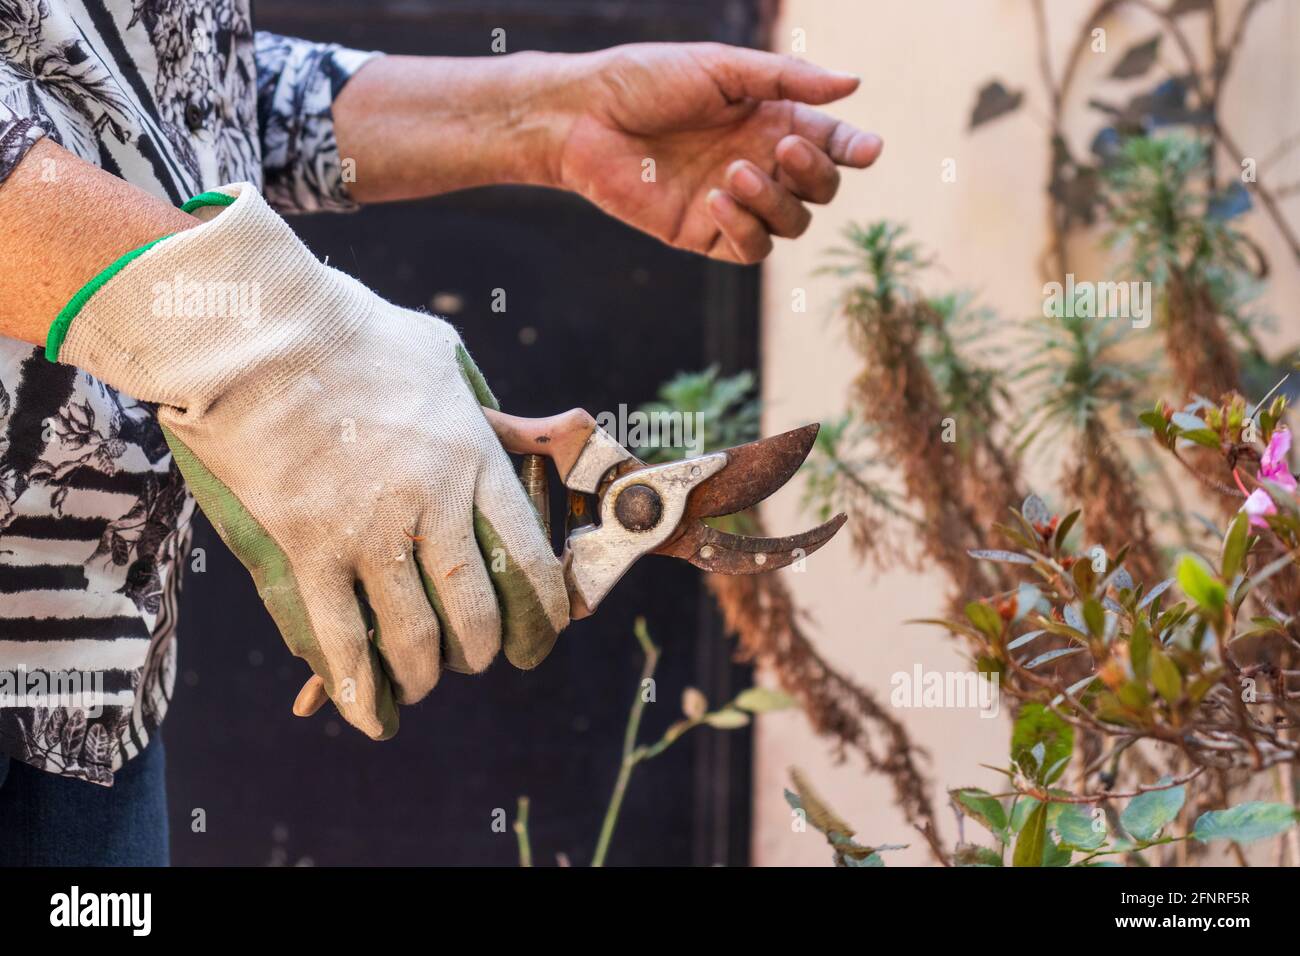 woman hands gardening and trimming plants with scissors Stock Photo